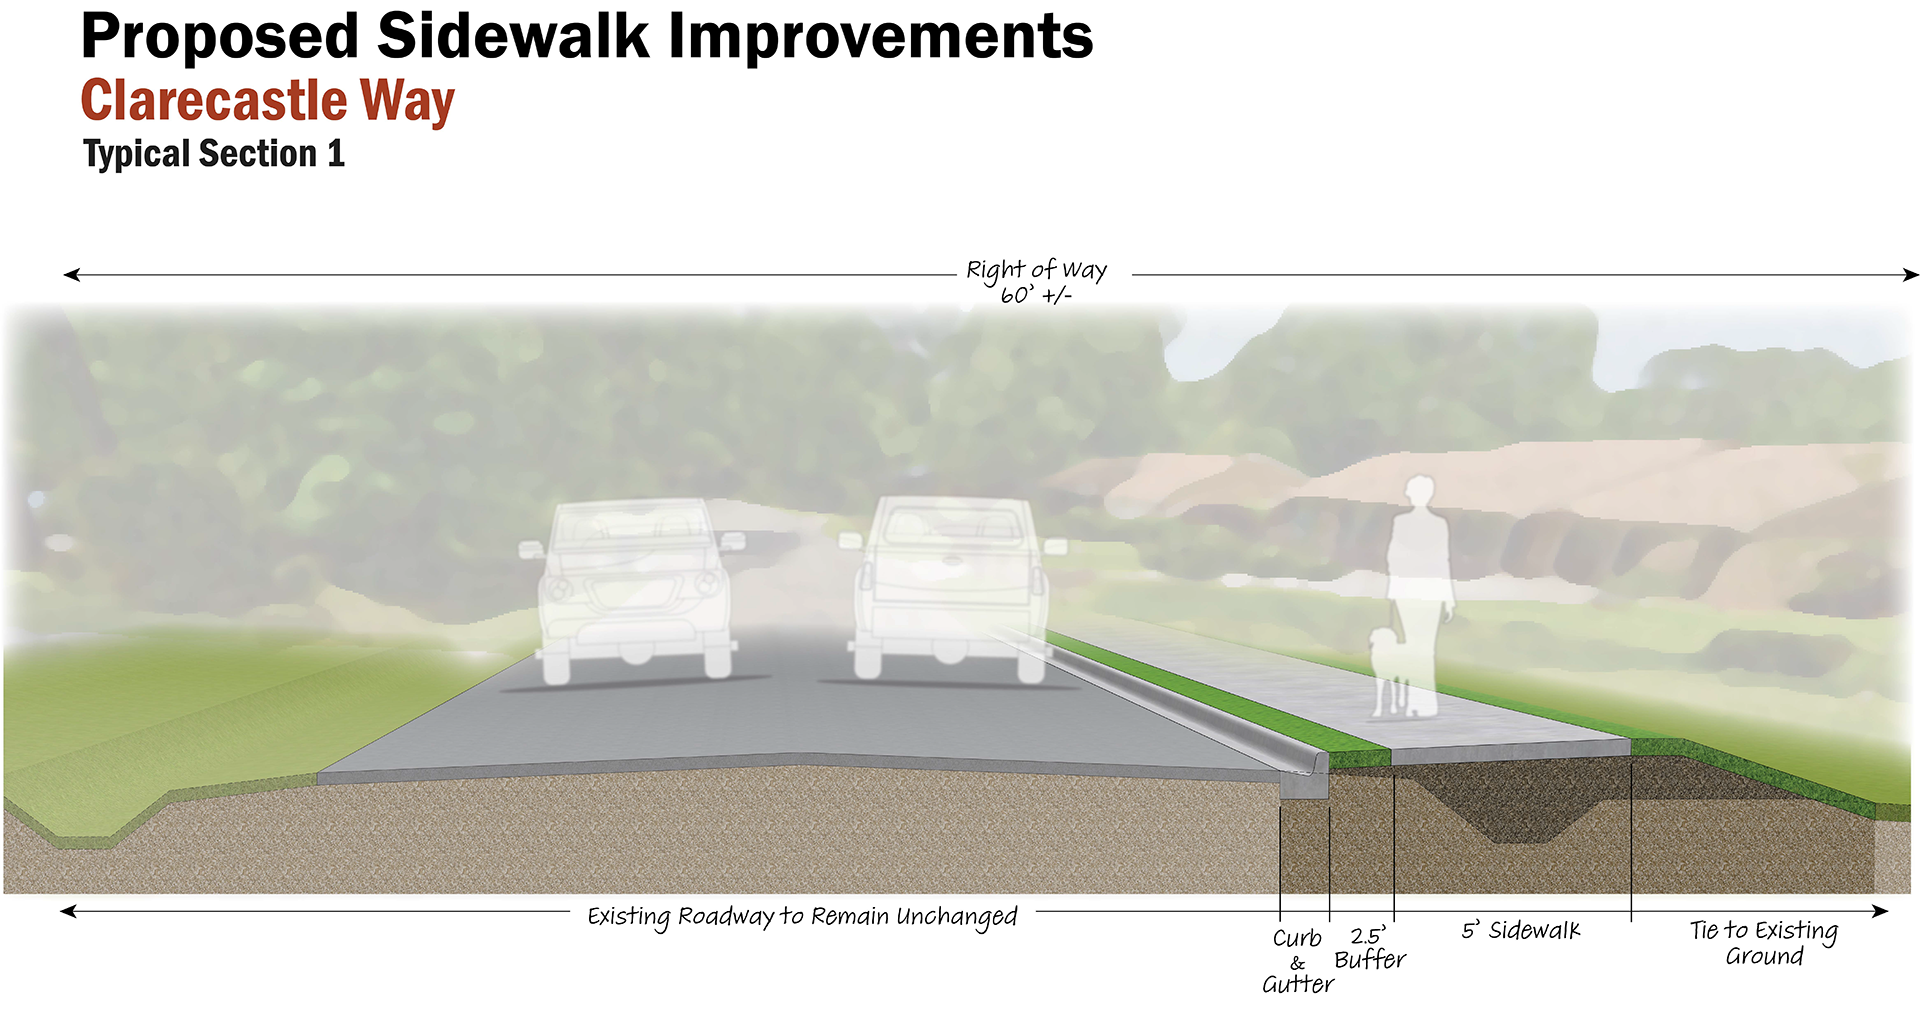 a typical cross section of the street in relation to the sidewalk